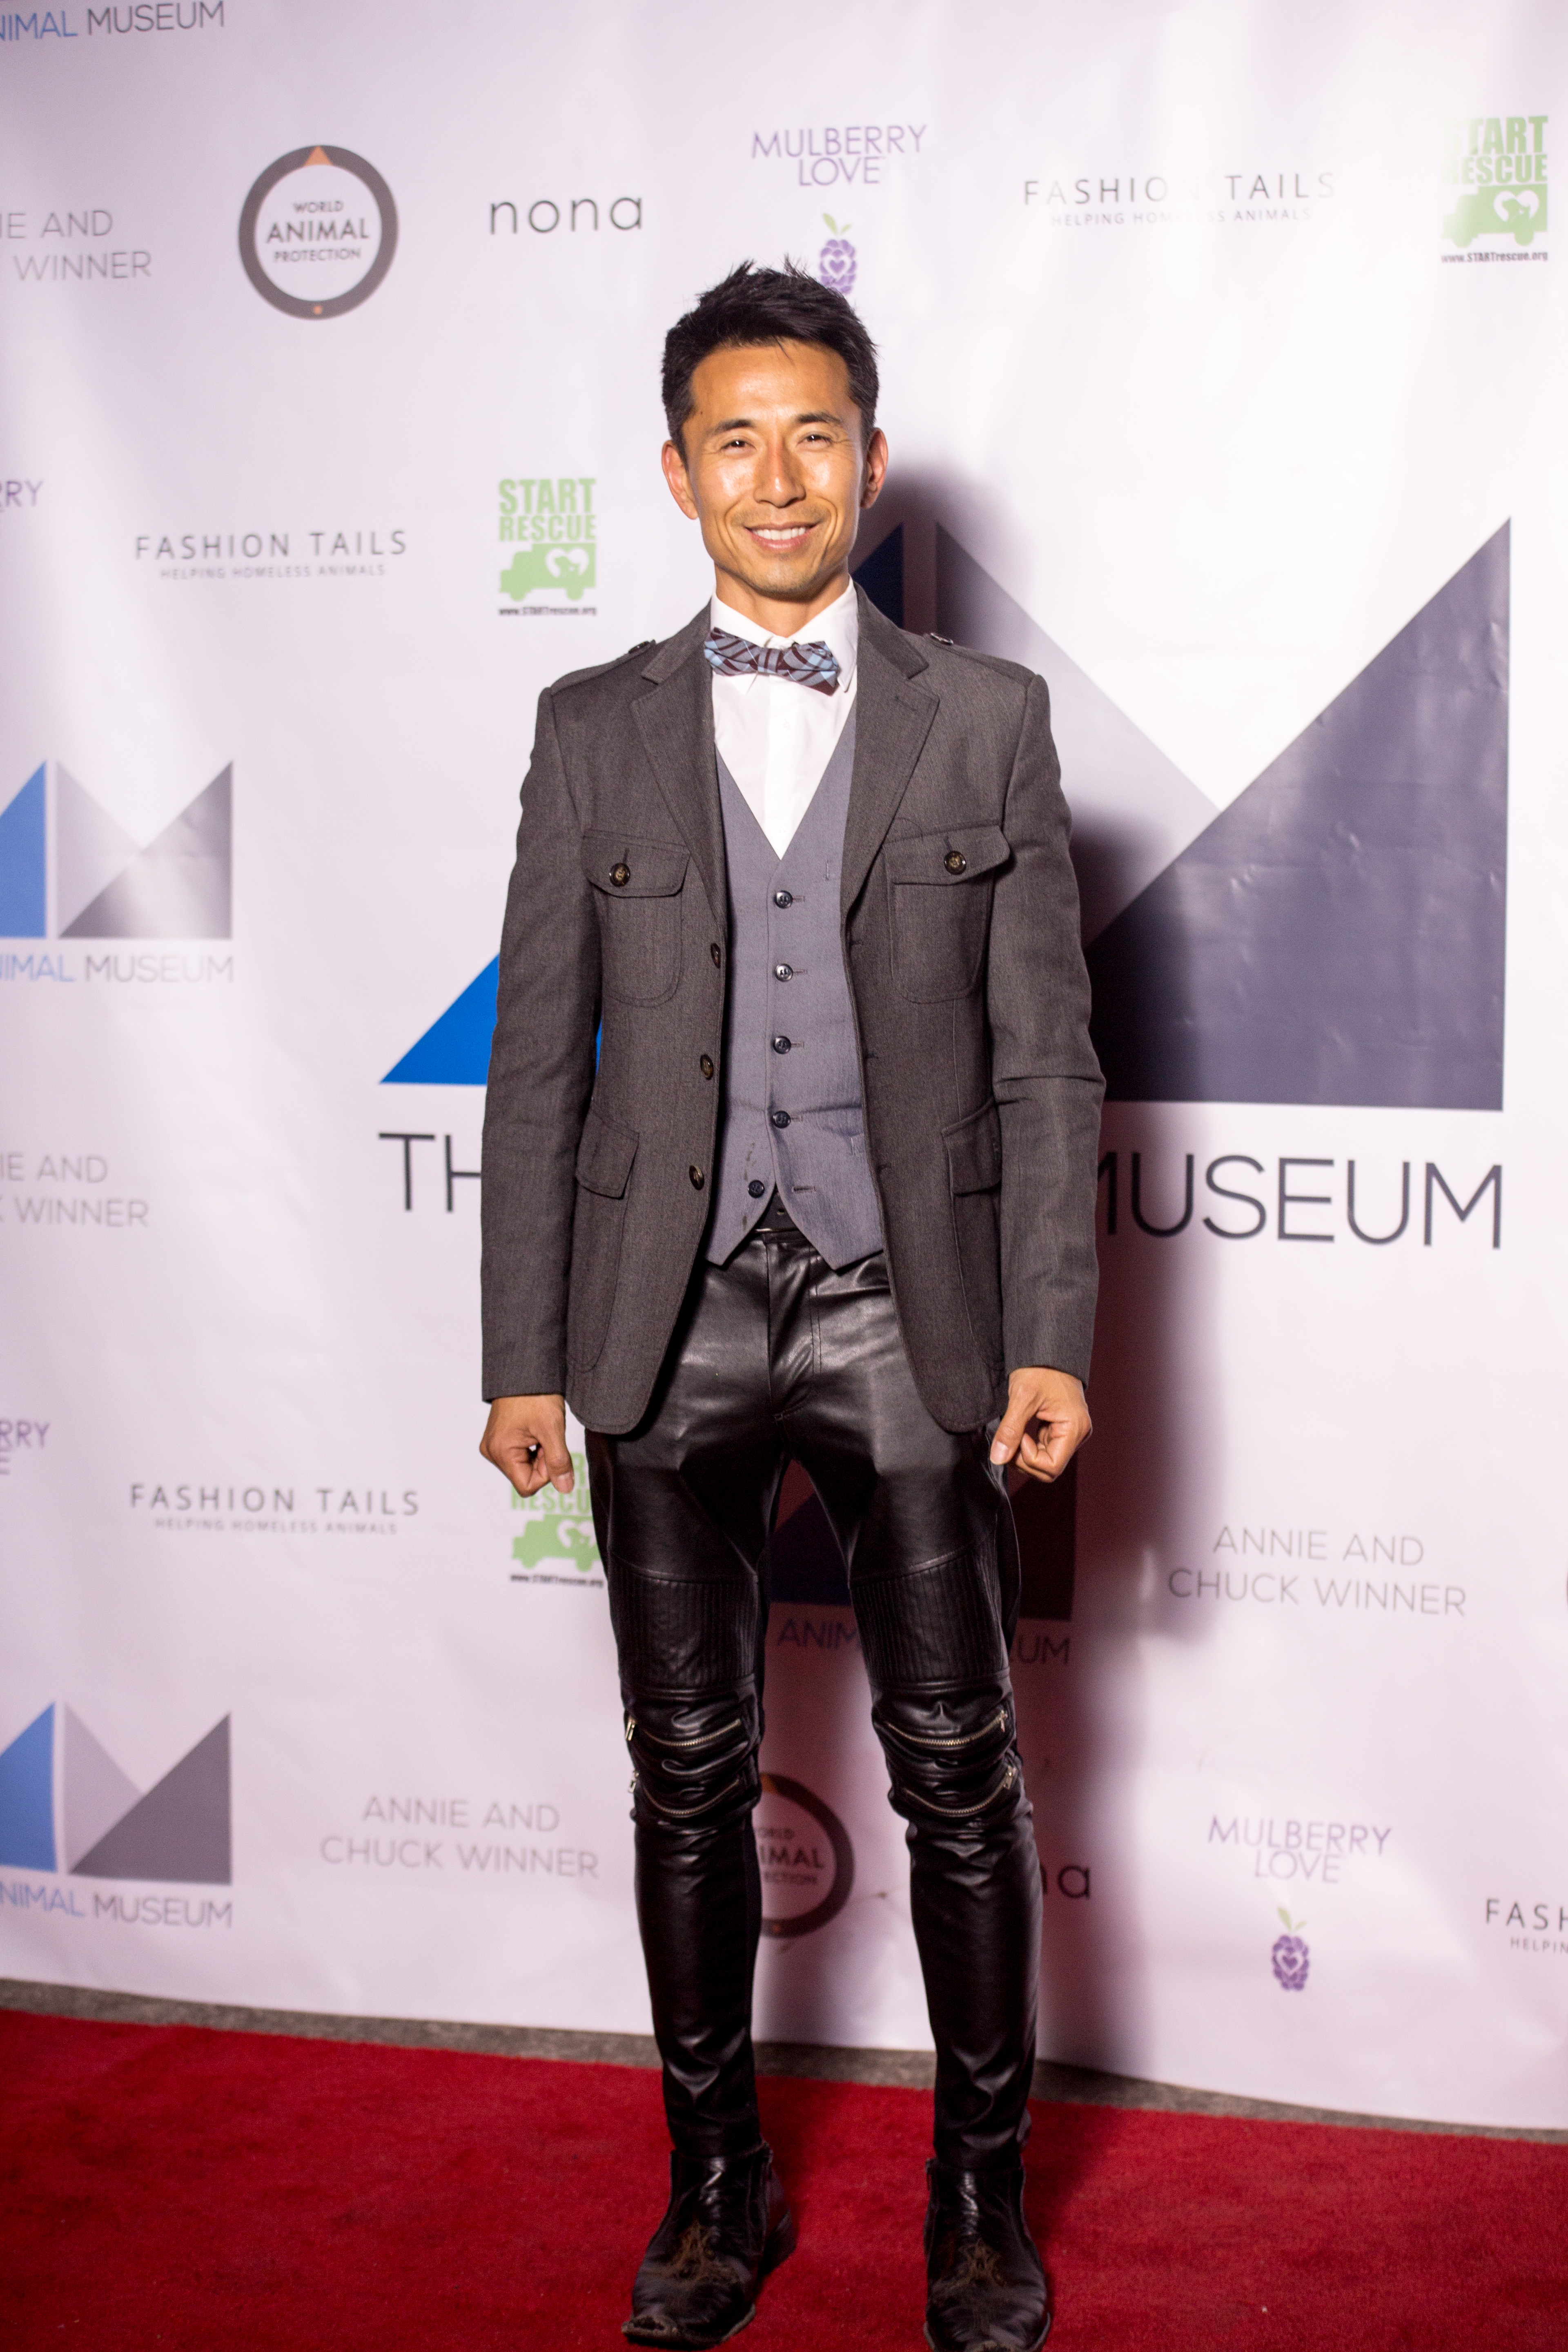 Kyson at the opening of the Animal Museum in December 2016